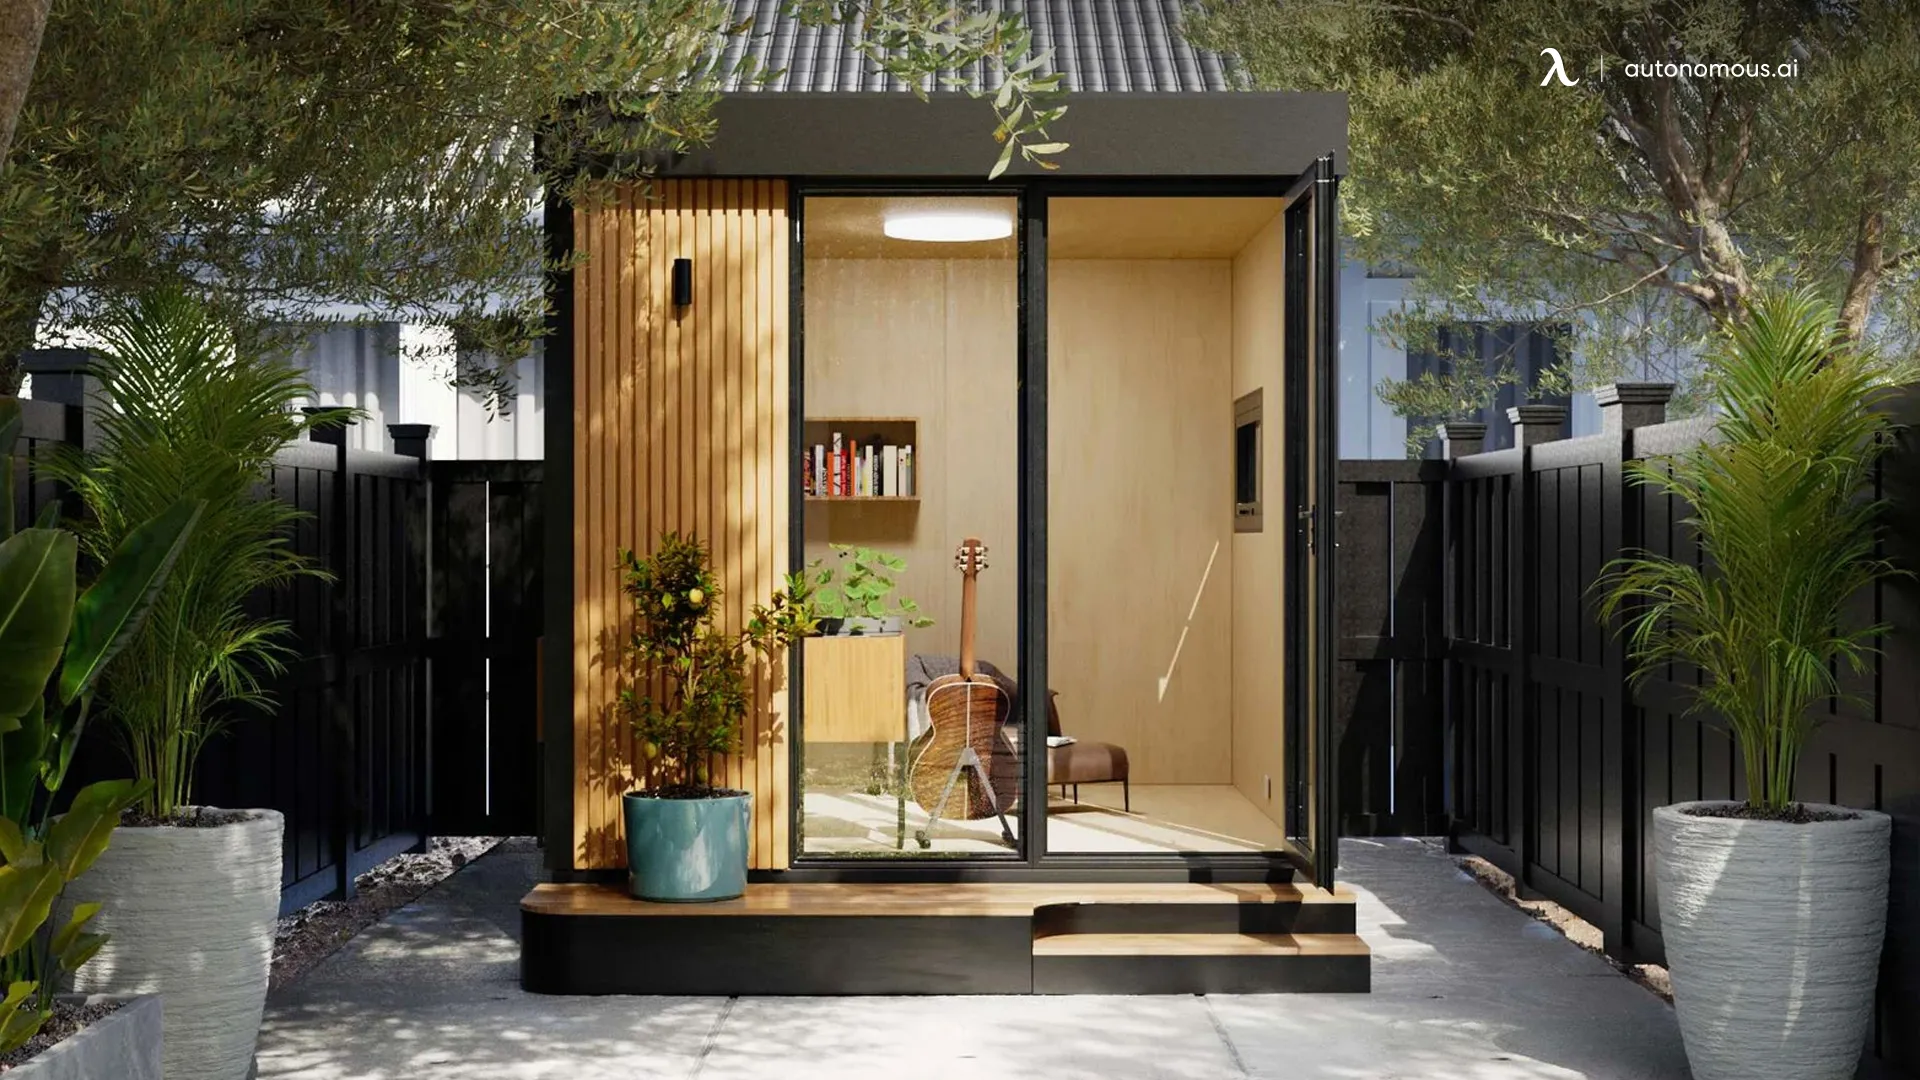 Tiny Homes for Compact Living